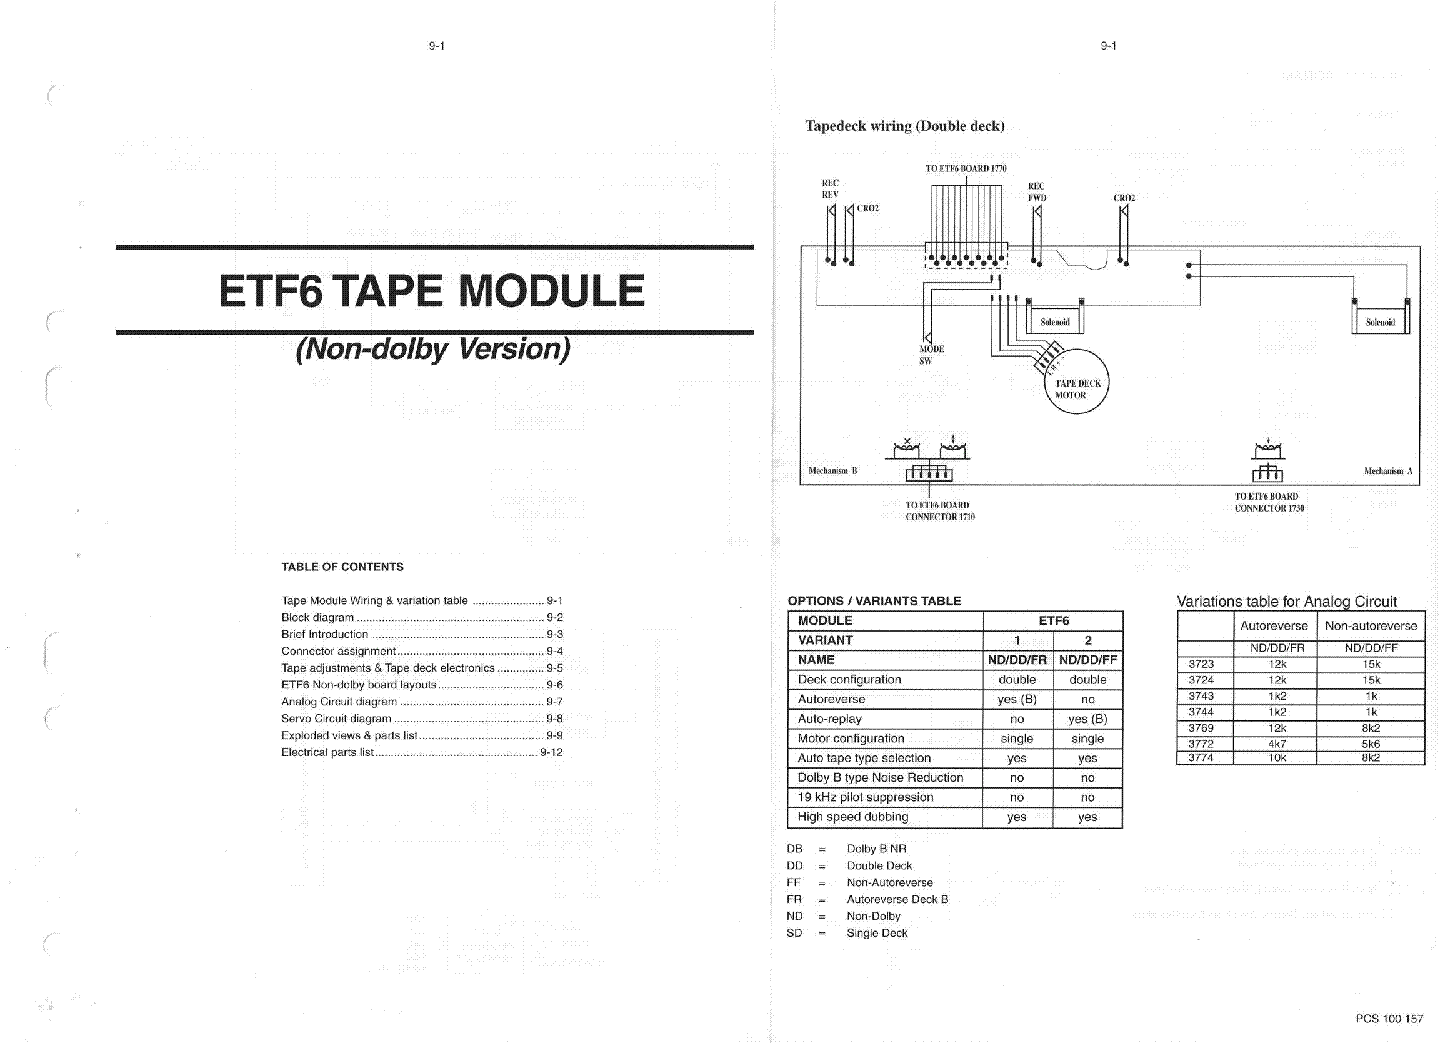 PHILIPS ETF6 TAPE MODULE NON DOLBY SM service manual (1st page)